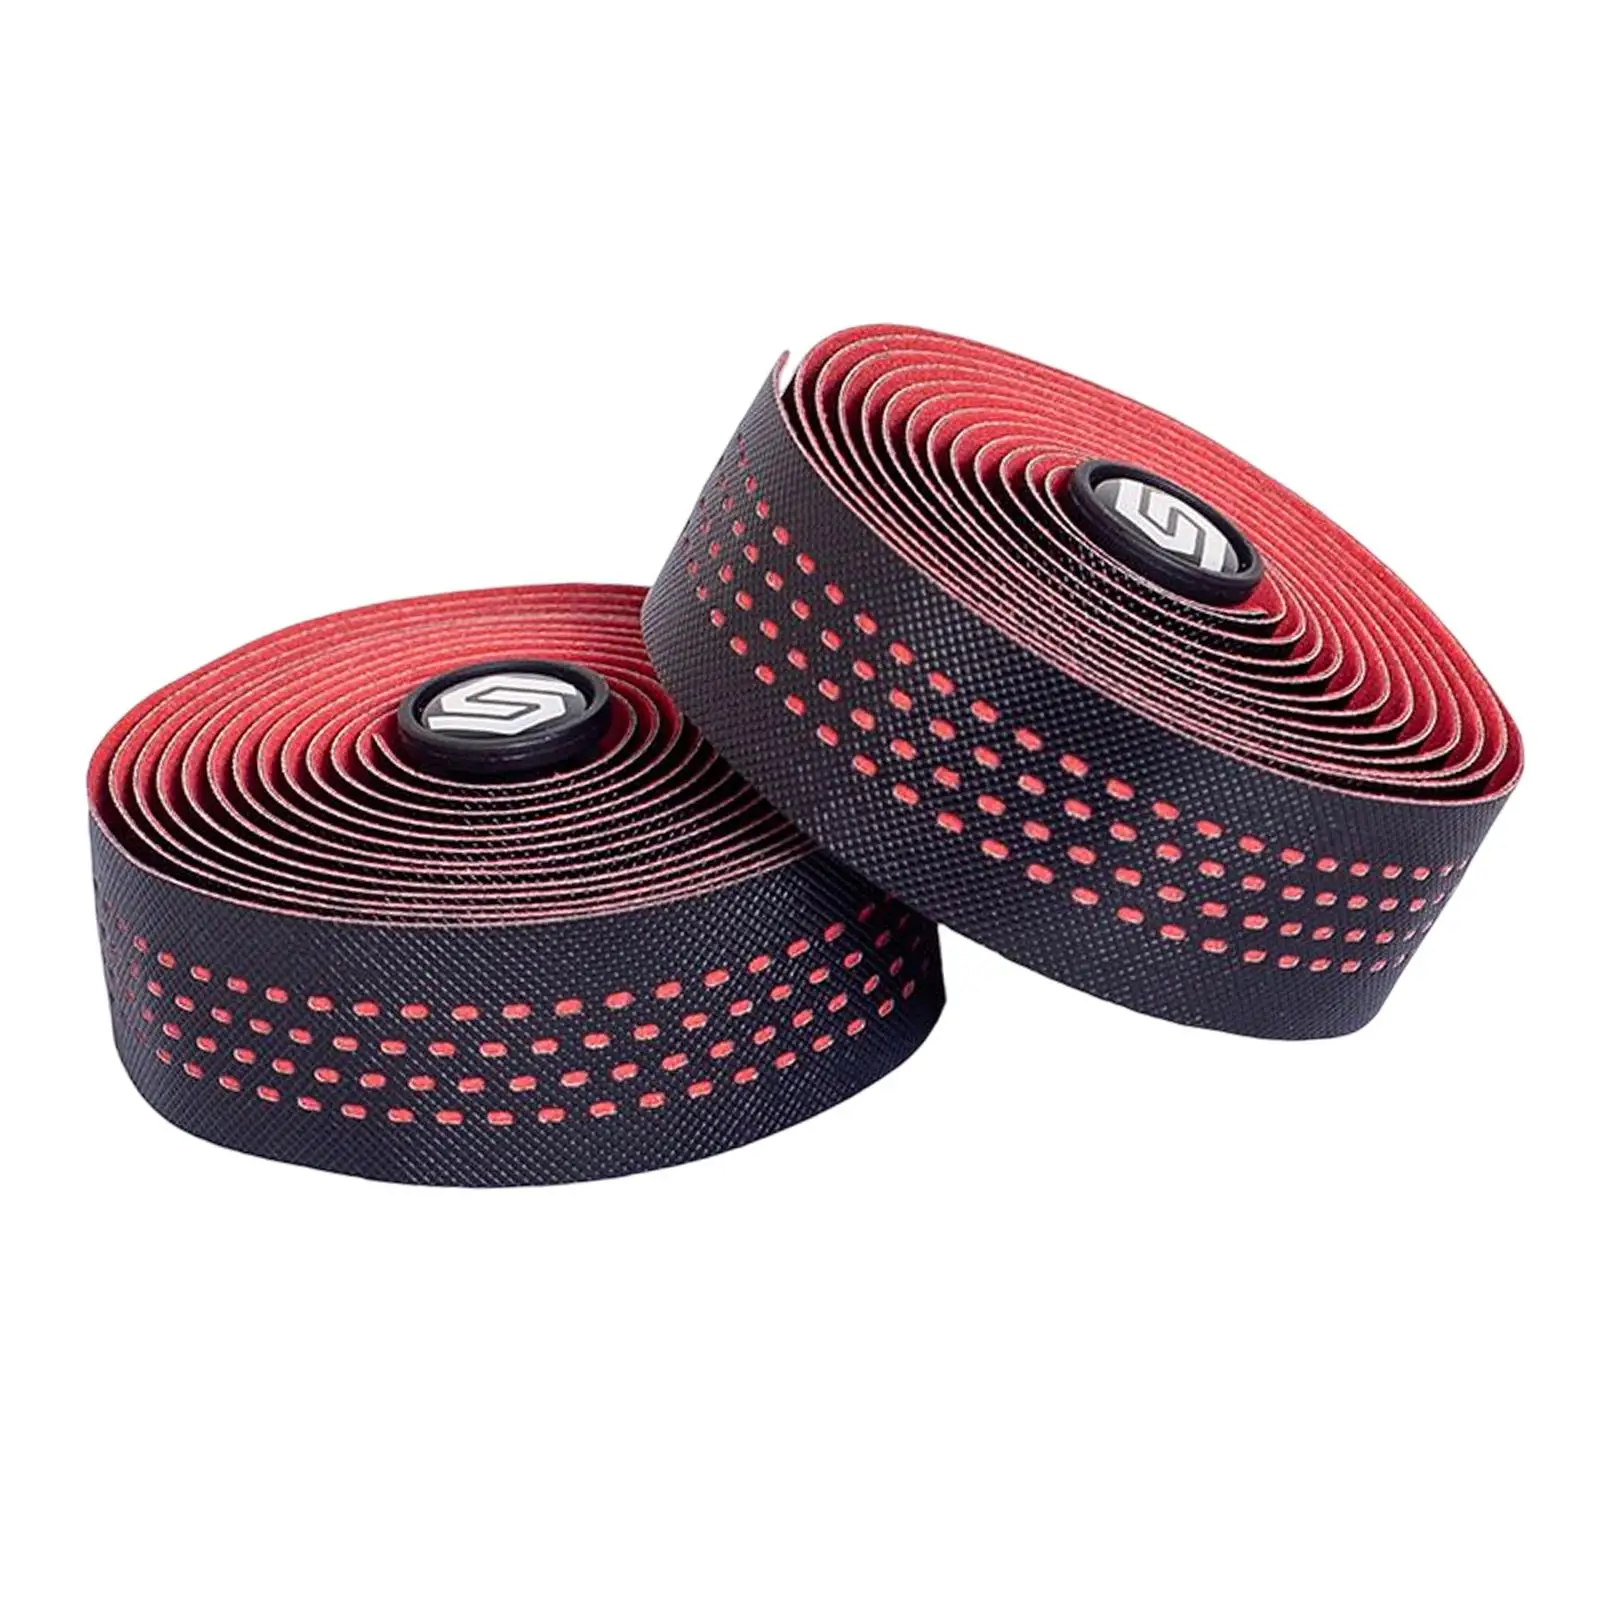 Soft Road Bike Handlebar Tapes with 2 Bar Plug Cycling Handle Wrap Shock Absorption Bike Tape Breathable Damping 2 Rolls